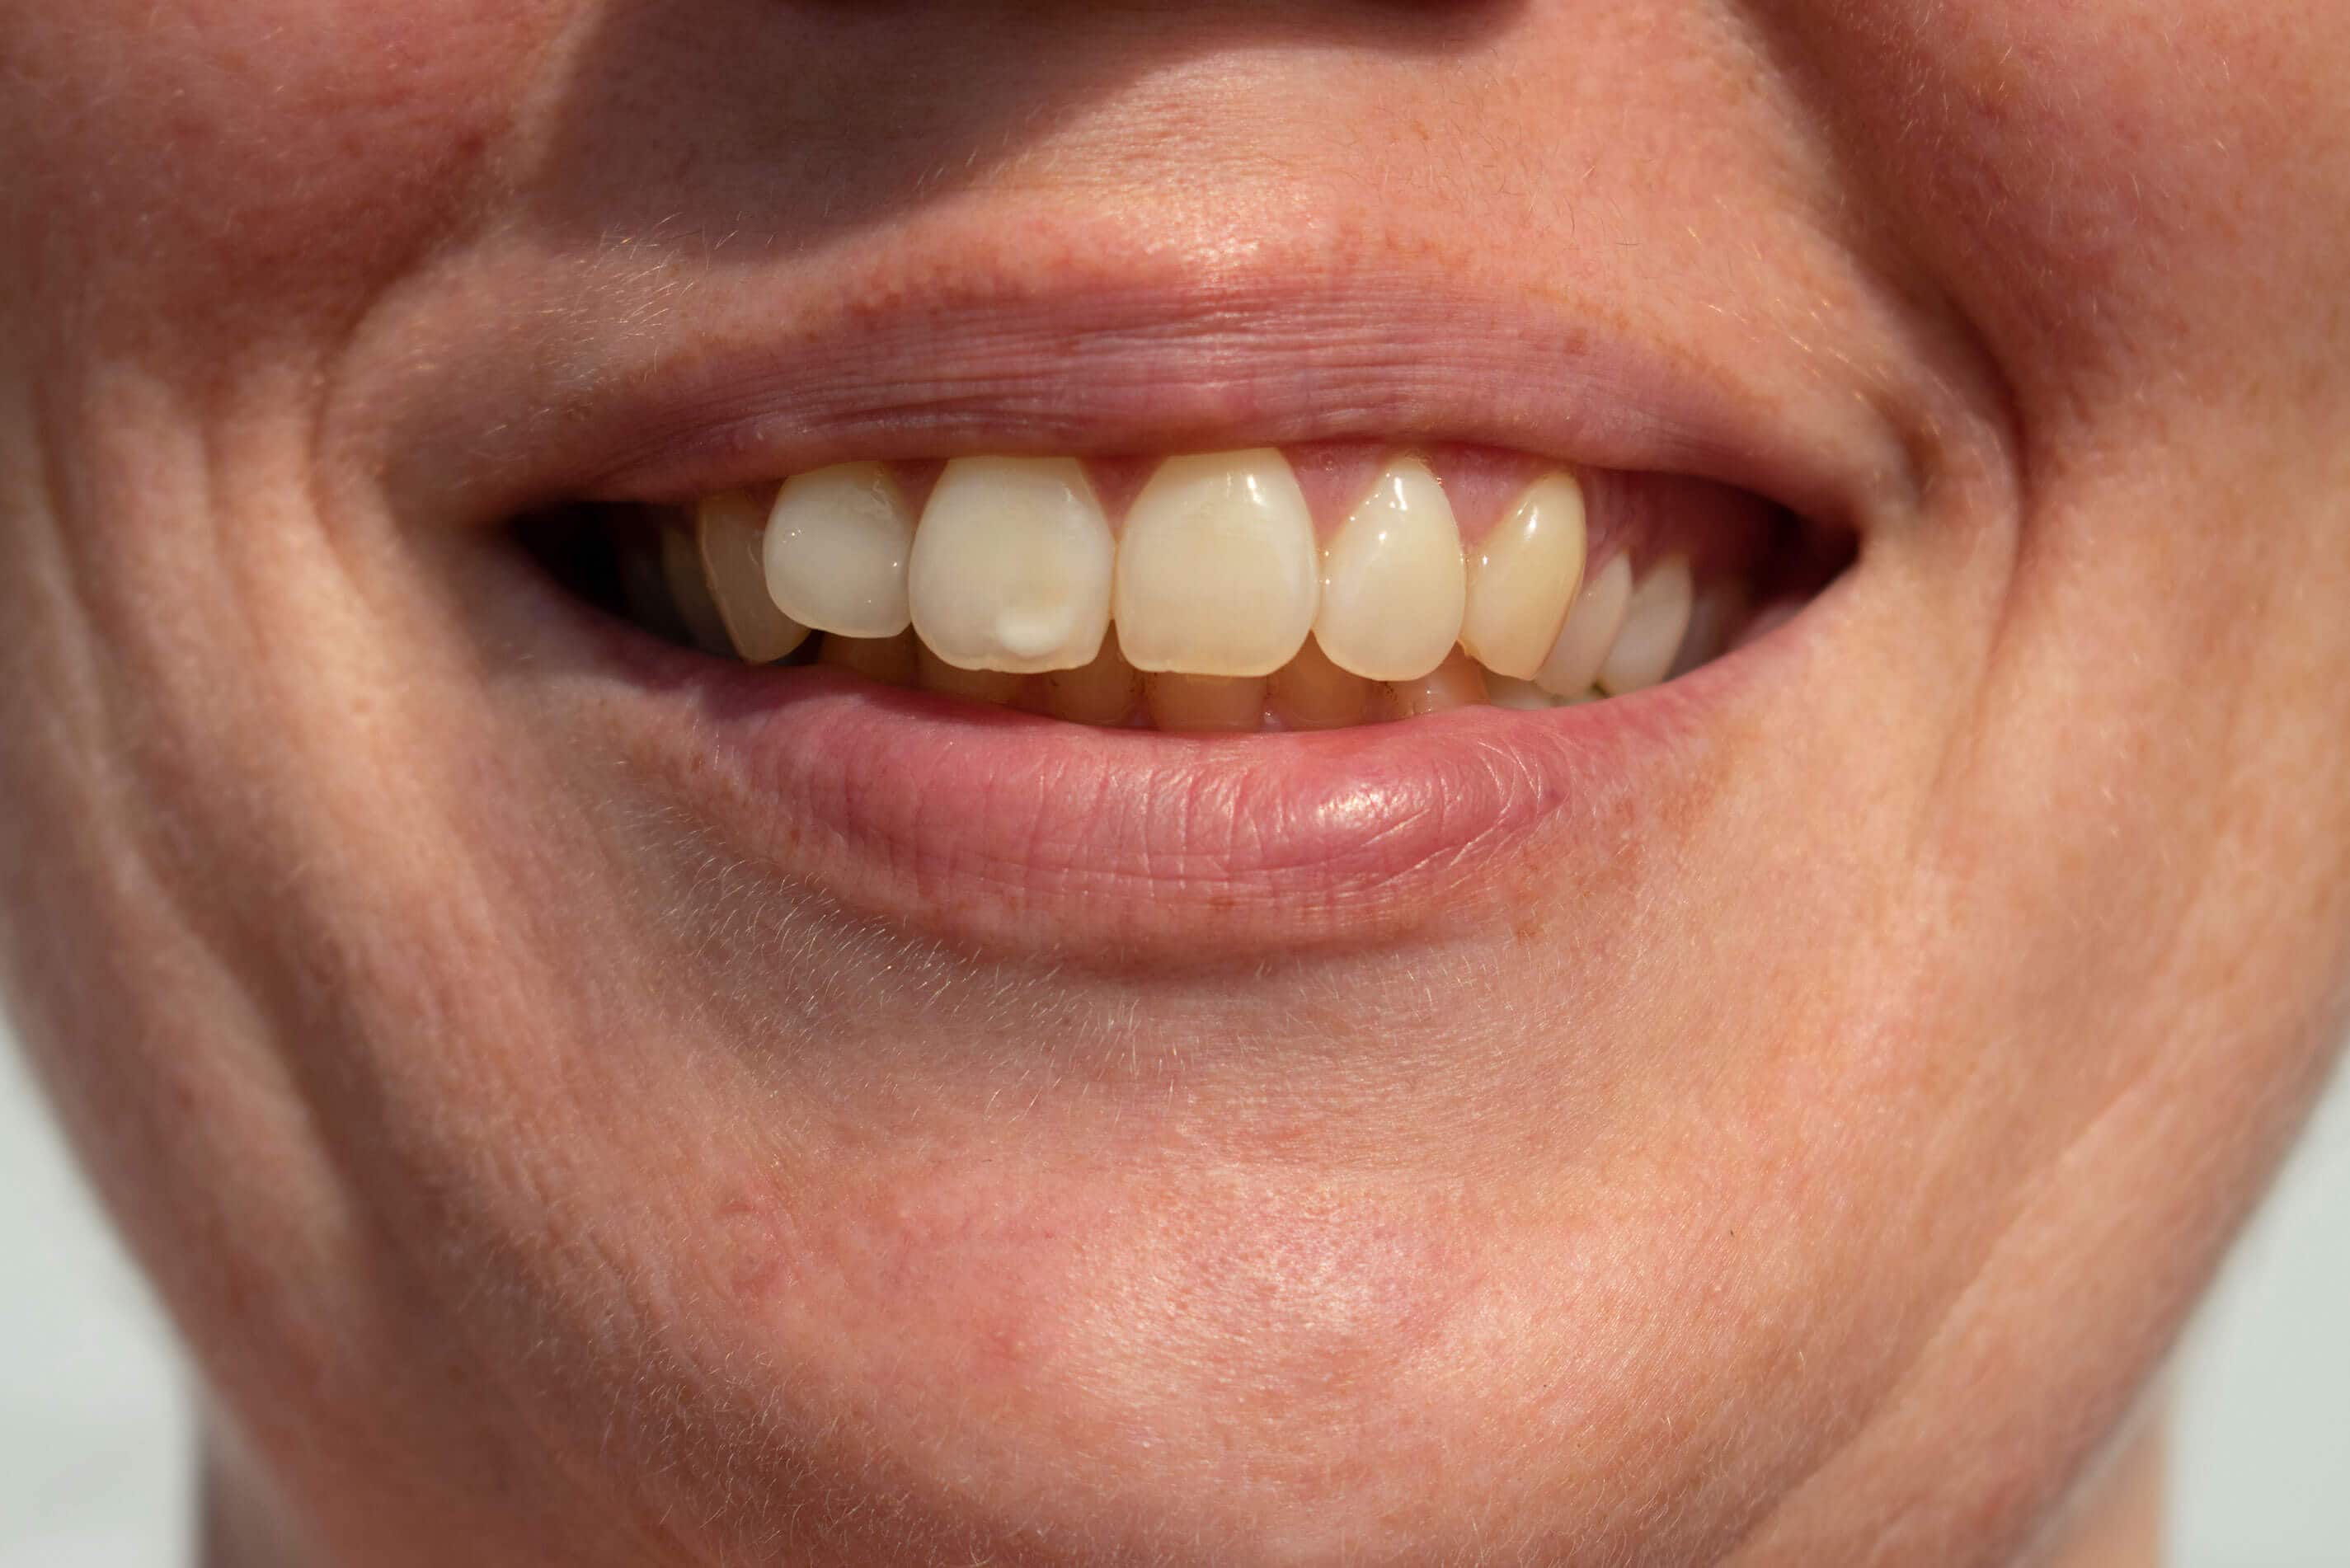 https://www.colgate.com/content/dam/cp-sites/oral-care/oral-care-center/global/article/tooth-spot-women-smiles-revealing-white.jpg